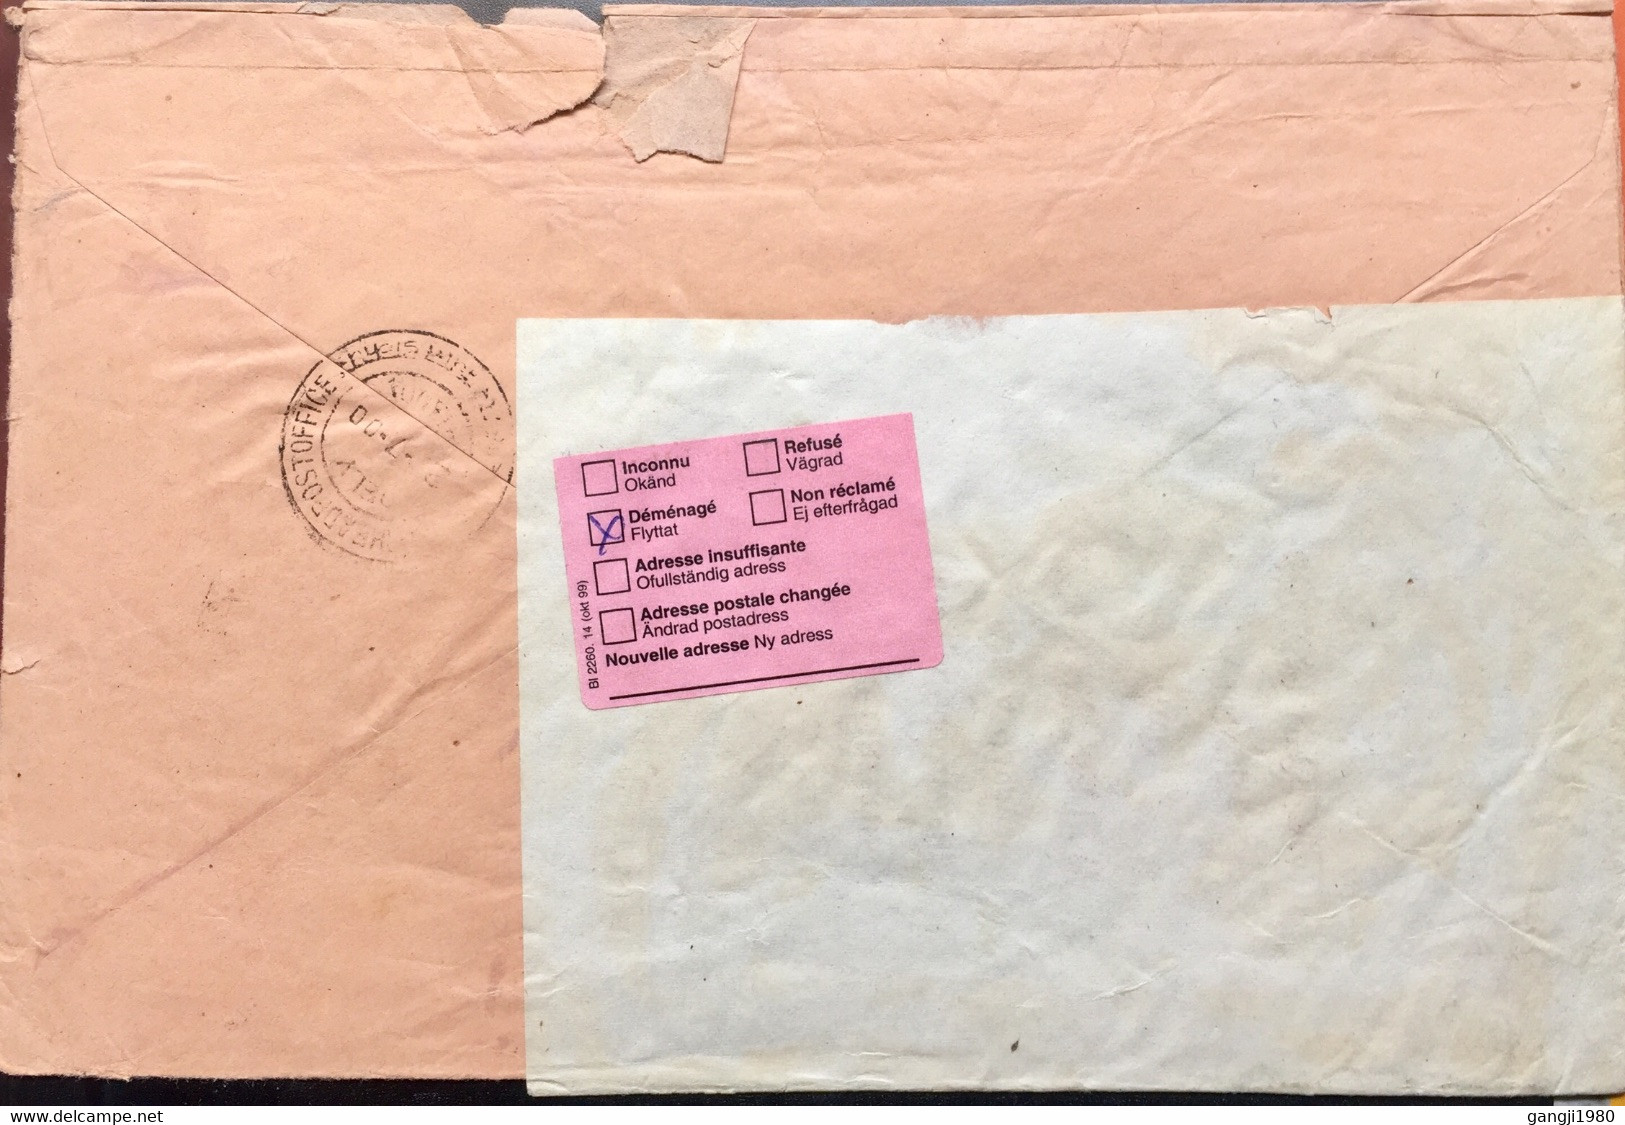 LUXEMBOURG 2000, AIRMAIL USED COVER TO SWEDEN RETURN TO SENDER VIGNETTE 2 DIFFERENT PINK LABELS - Covers & Documents